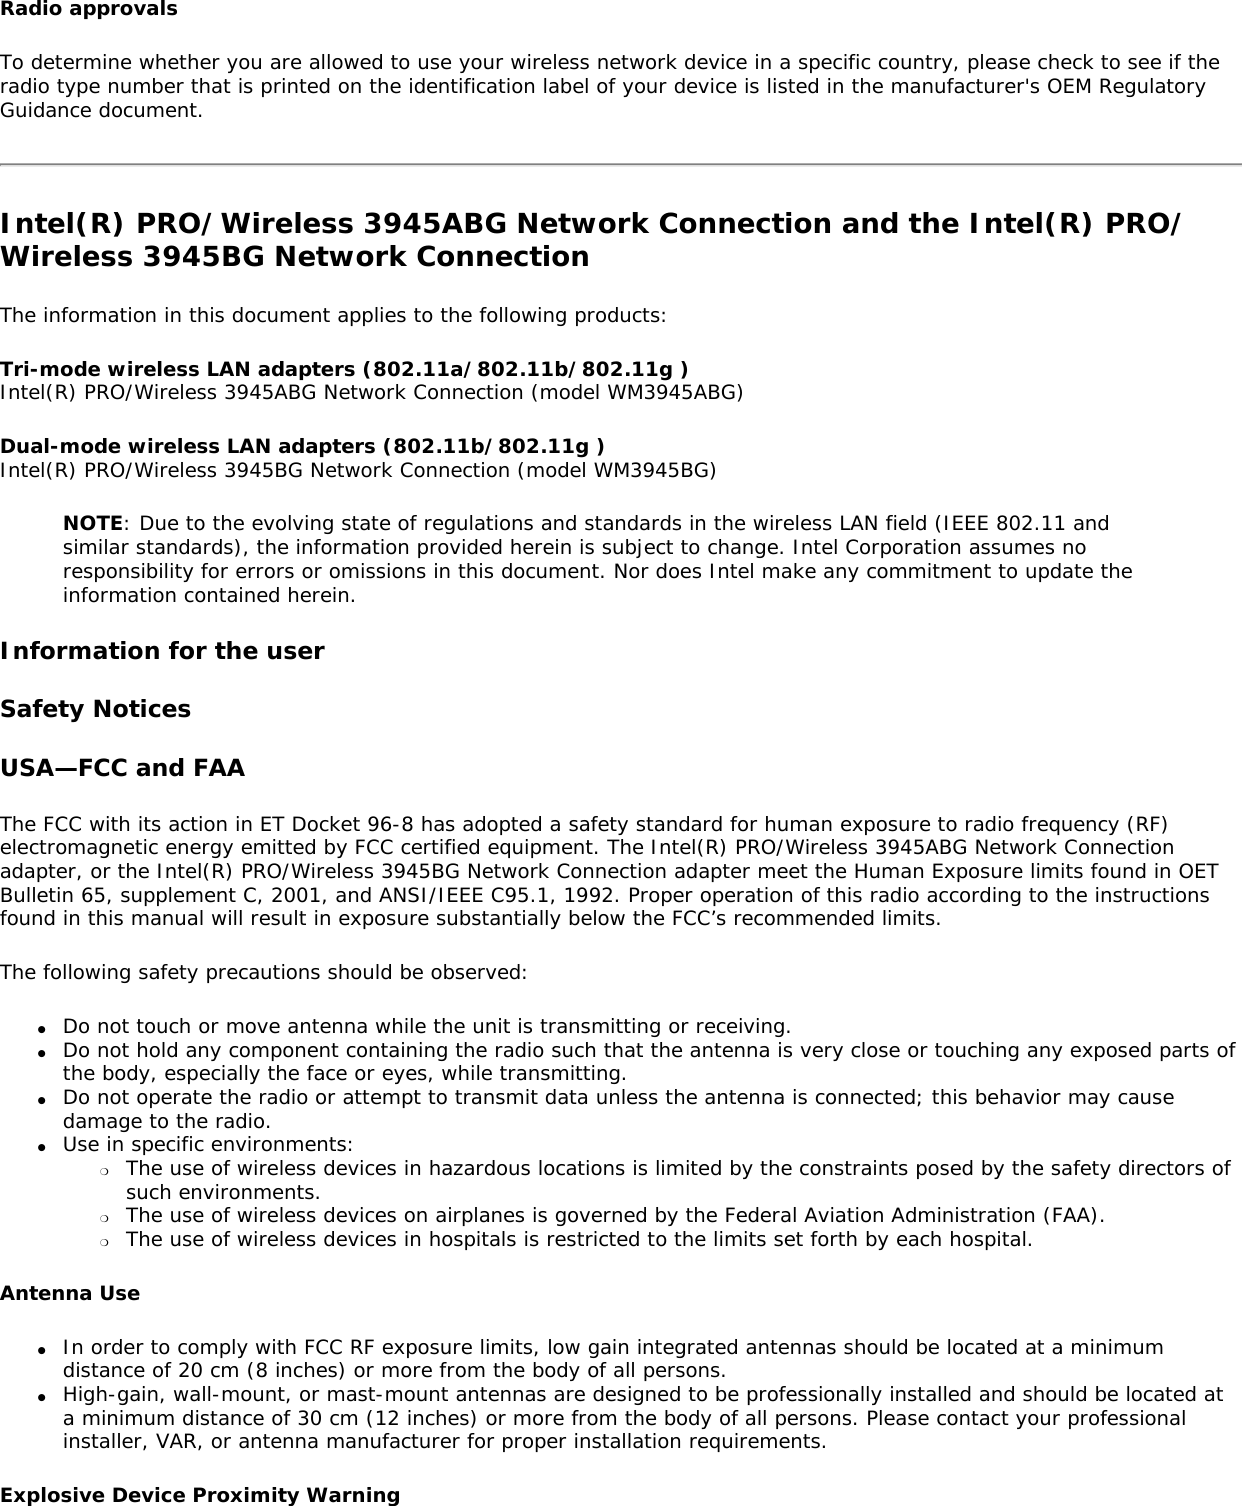 Radio approvalsTo determine whether you are allowed to use your wireless network device in a specific country, please check to see if the radio type number that is printed on the identification label of your device is listed in the manufacturer&apos;s OEM Regulatory Guidance document.Intel(R) PRO/Wireless 3945ABG Network Connection and the Intel(R) PRO/Wireless 3945BG Network ConnectionThe information in this document applies to the following products:Tri-mode wireless LAN adapters (802.11a/802.11b/802.11g ) Intel(R) PRO/Wireless 3945ABG Network Connection (model WM3945ABG)Dual-mode wireless LAN adapters (802.11b/802.11g ) Intel(R) PRO/Wireless 3945BG Network Connection (model WM3945BG)NOTE: Due to the evolving state of regulations and standards in the wireless LAN field (IEEE 802.11 and similar standards), the information provided herein is subject to change. Intel Corporation assumes no responsibility for errors or omissions in this document. Nor does Intel make any commitment to update the information contained herein.Information for the userSafety NoticesUSA—FCC and FAAThe FCC with its action in ET Docket 96-8 has adopted a safety standard for human exposure to radio frequency (RF) electromagnetic energy emitted by FCC certified equipment. The Intel(R) PRO/Wireless 3945ABG Network Connection adapter, or the Intel(R) PRO/Wireless 3945BG Network Connection adapter meet the Human Exposure limits found in OET Bulletin 65, supplement C, 2001, and ANSI/IEEE C95.1, 1992. Proper operation of this radio according to the instructions found in this manual will result in exposure substantially below the FCC’s recommended limits.The following safety precautions should be observed:●     Do not touch or move antenna while the unit is transmitting or receiving.●     Do not hold any component containing the radio such that the antenna is very close or touching any exposed parts of the body, especially the face or eyes, while transmitting.●     Do not operate the radio or attempt to transmit data unless the antenna is connected; this behavior may cause damage to the radio.●     Use in specific environments: ❍     The use of wireless devices in hazardous locations is limited by the constraints posed by the safety directors of such environments.❍     The use of wireless devices on airplanes is governed by the Federal Aviation Administration (FAA).❍     The use of wireless devices in hospitals is restricted to the limits set forth by each hospital.Antenna Use●     In order to comply with FCC RF exposure limits, low gain integrated antennas should be located at a minimum distance of 20 cm (8 inches) or more from the body of all persons.●     High-gain, wall-mount, or mast-mount antennas are designed to be professionally installed and should be located at a minimum distance of 30 cm (12 inches) or more from the body of all persons. Please contact your professional installer, VAR, or antenna manufacturer for proper installation requirements.Explosive Device Proximity Warning